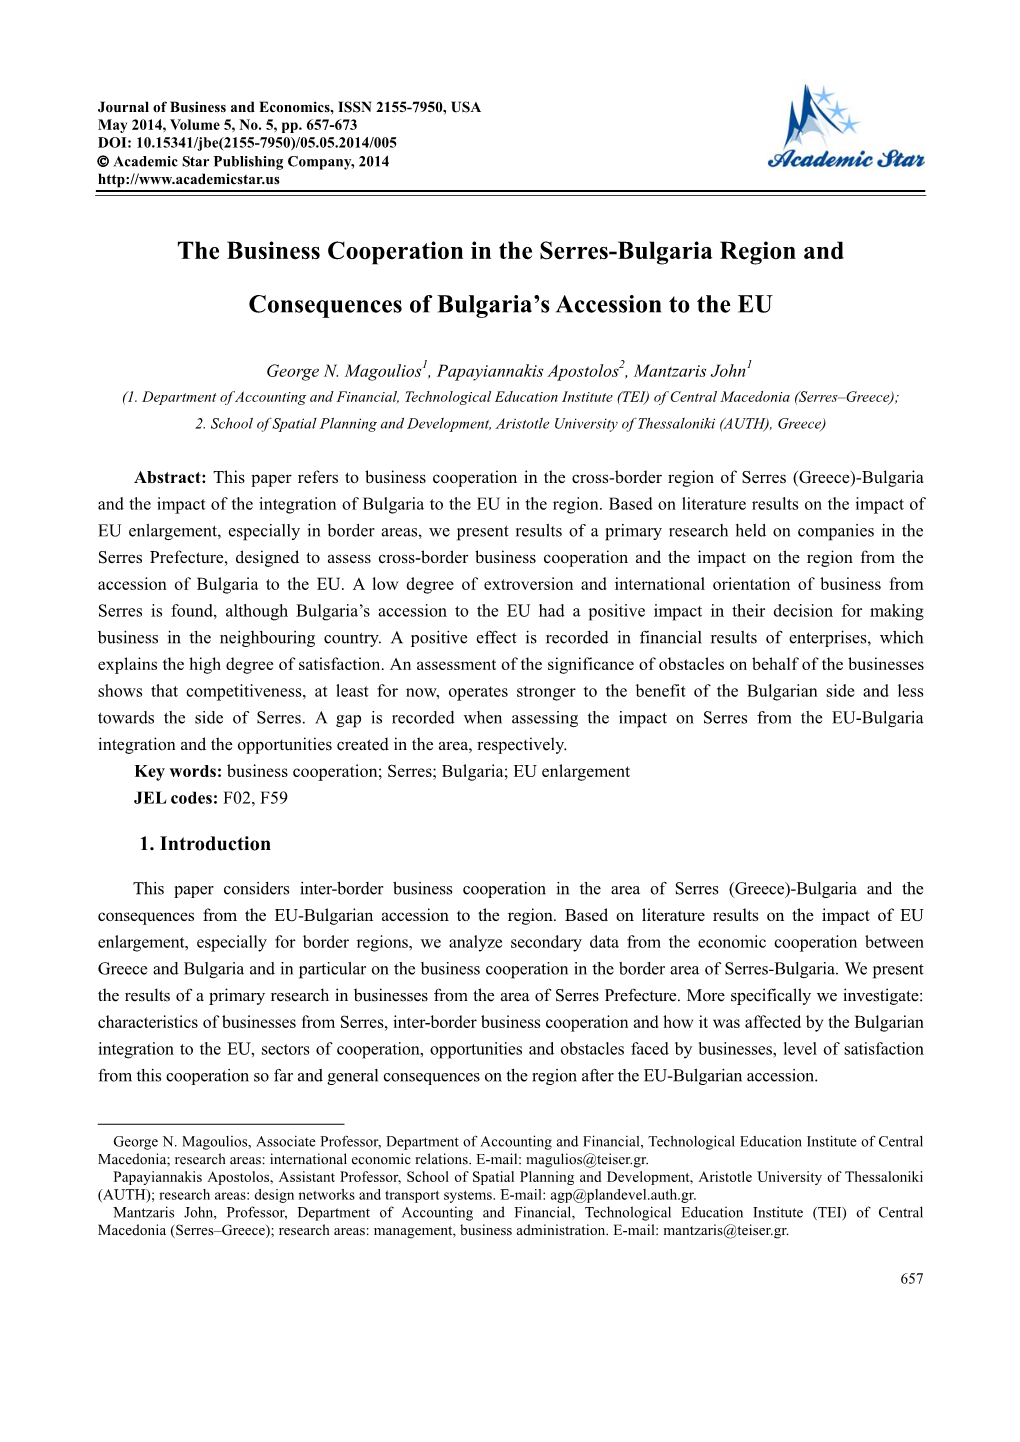 The Business Cooperation in the Serres-Bulgaria Region And